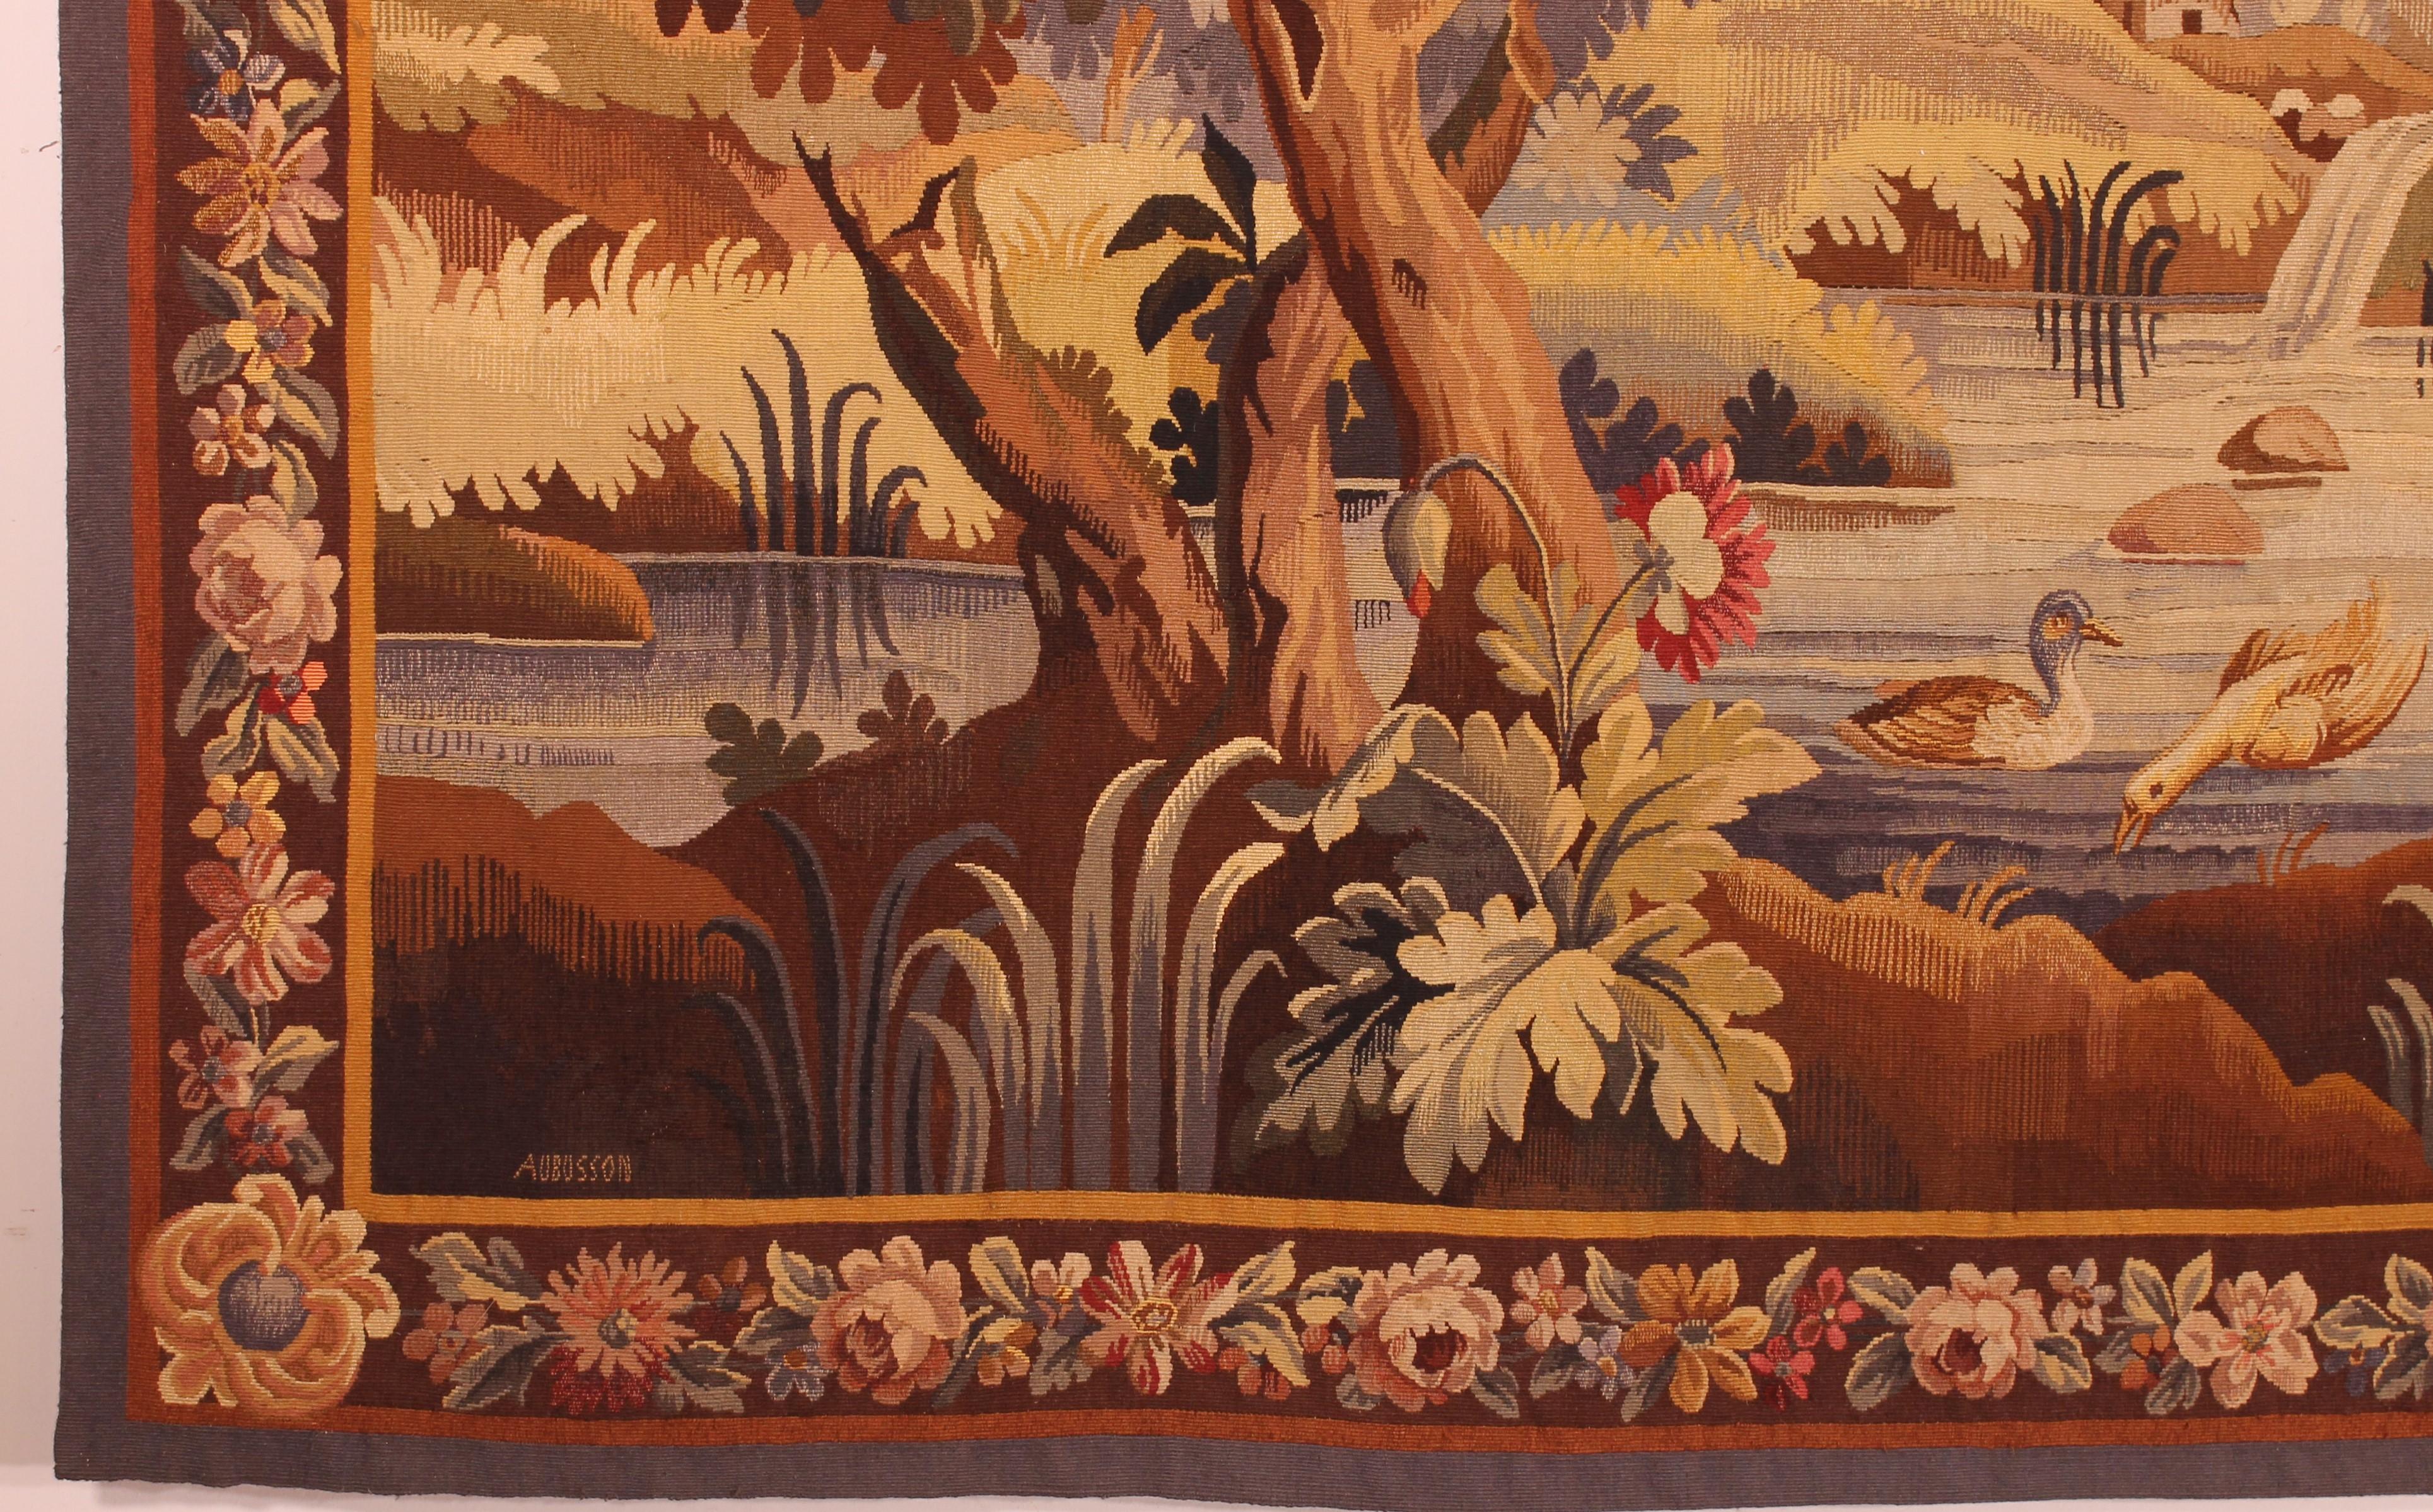 Very beautiful tapestry signed Aubusson from the 19th century
Very beautiful verdure composed of numerous trees, animals and a house in the background
Beautiful perspective and dimensions very easy to place

The tapestry is in very good condition